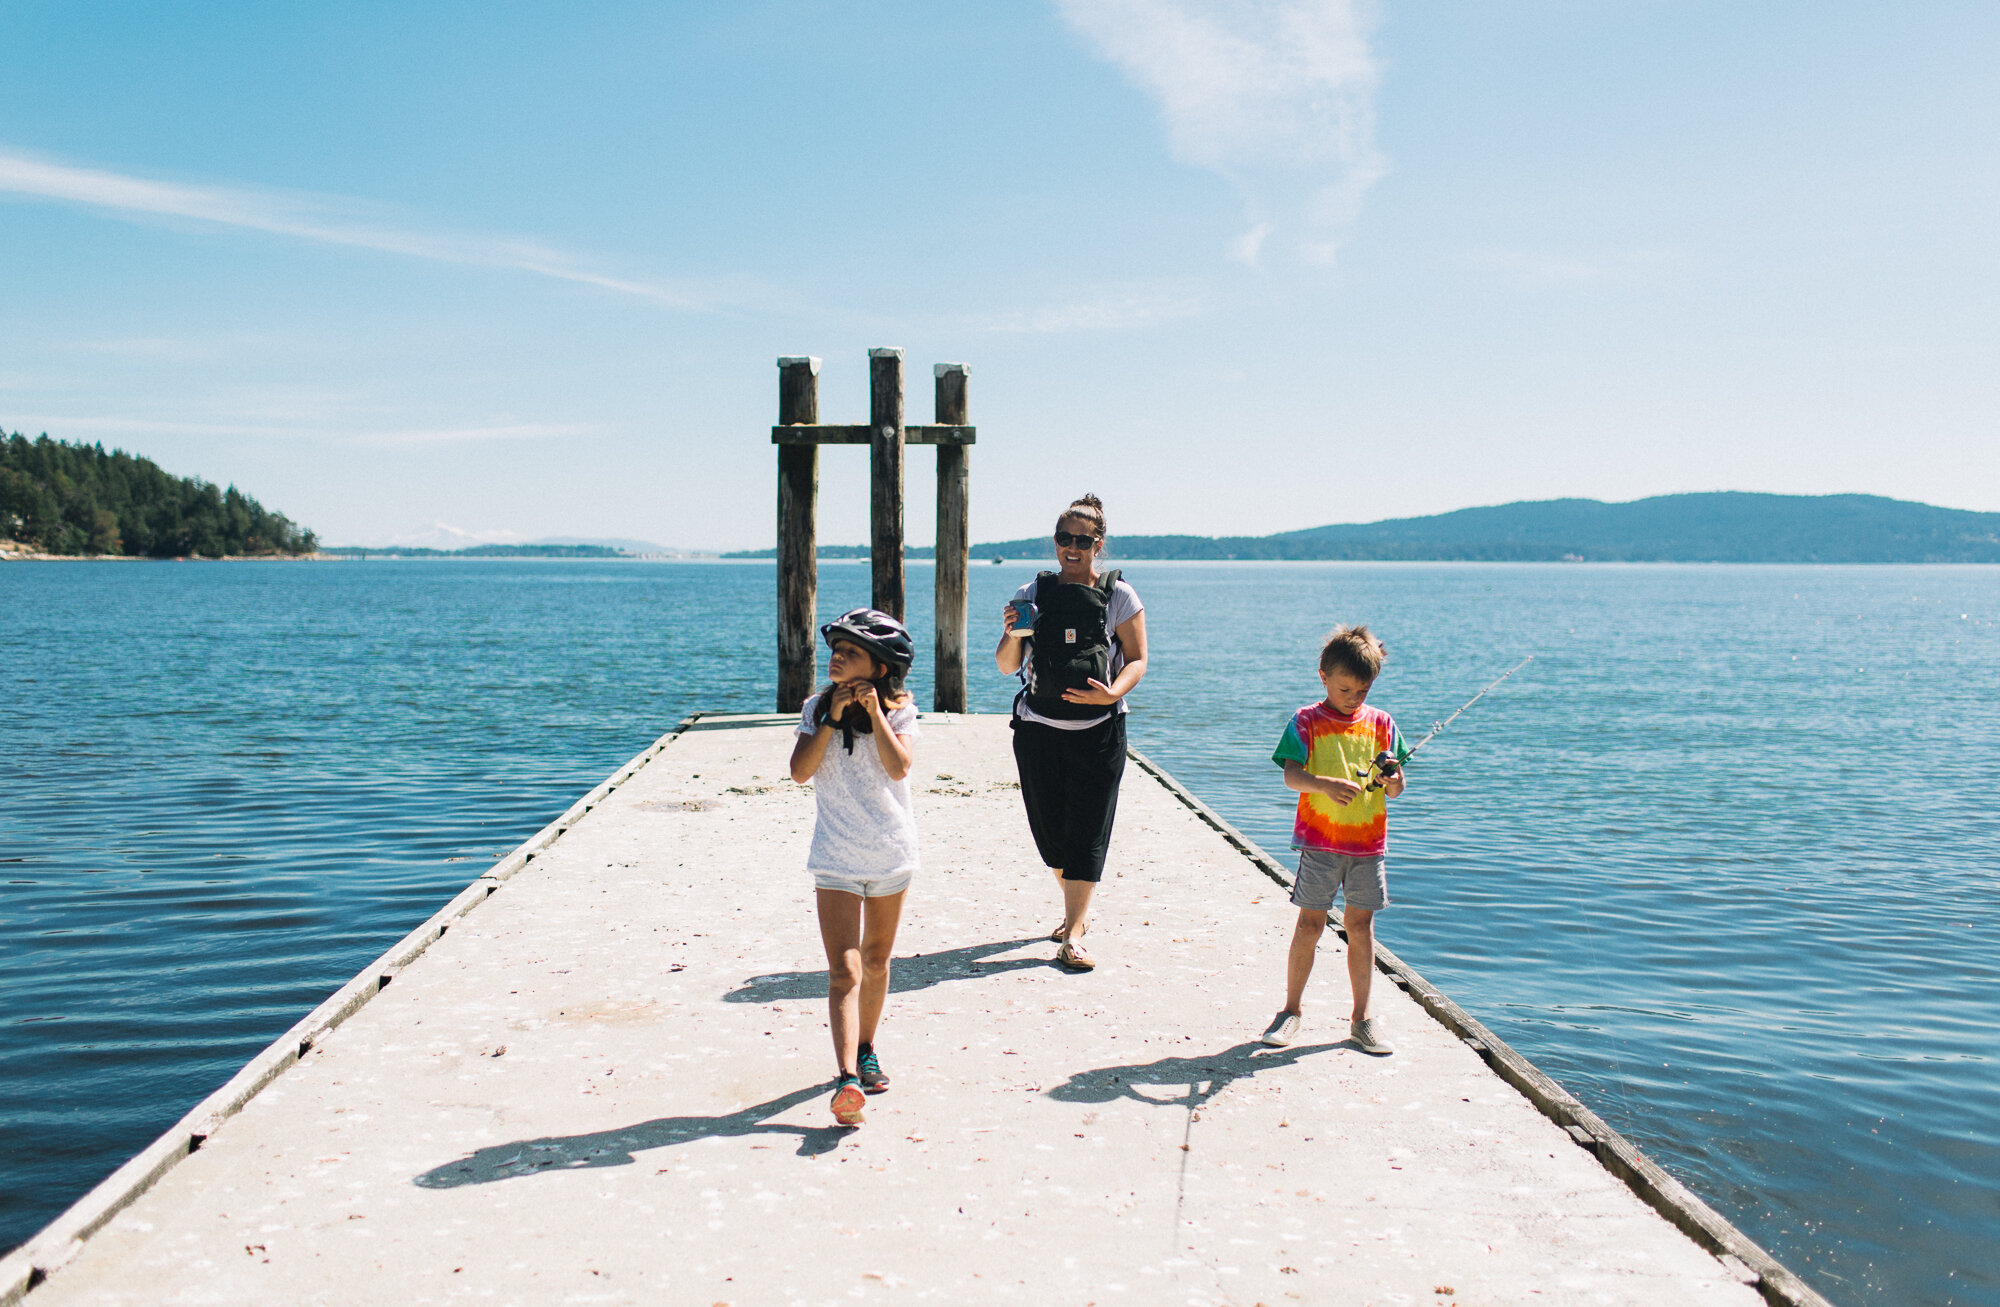 Family adventure photography sessions with Kristen Turner MacDonald on Vancouver Island